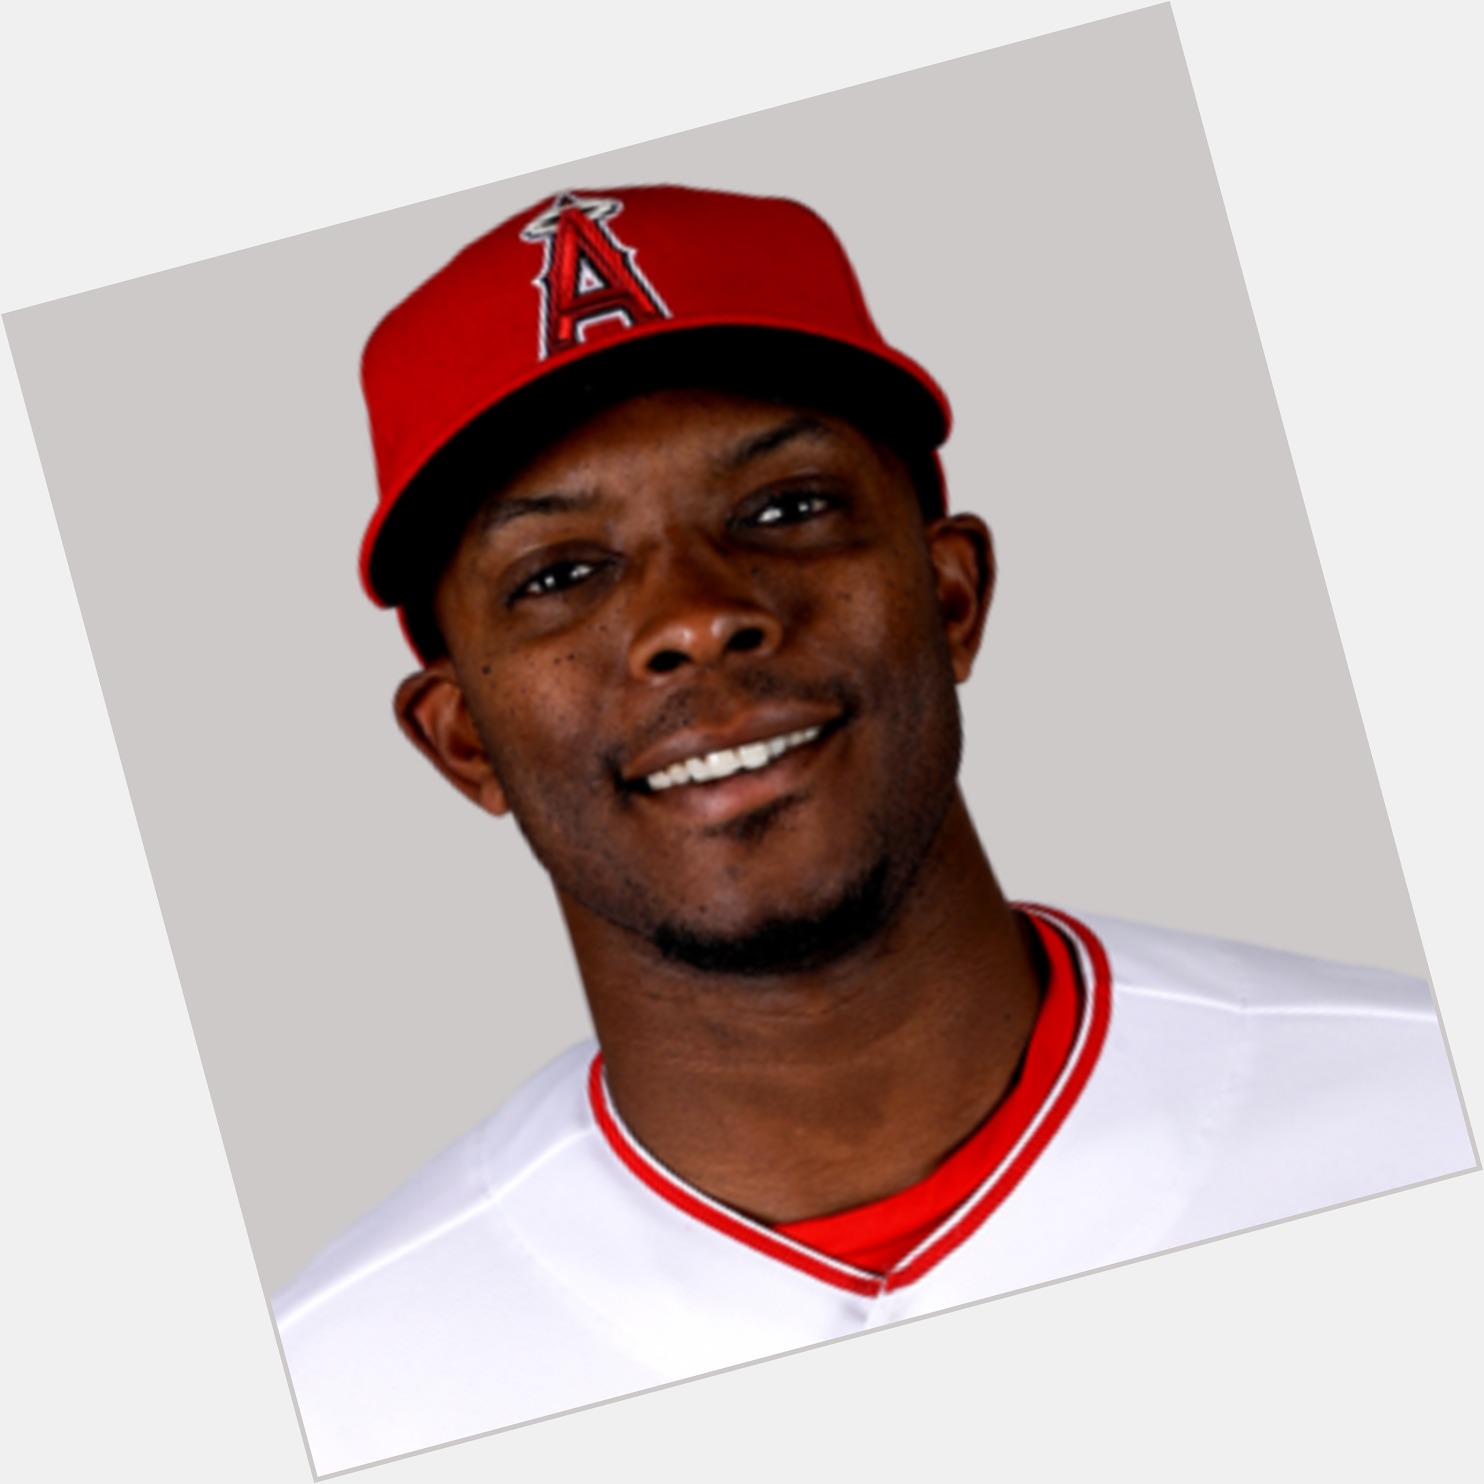 <a href="/hot-men/justin-upton/is-he-related-kate-bj-playing-tonight-where">Justin Upton</a>  